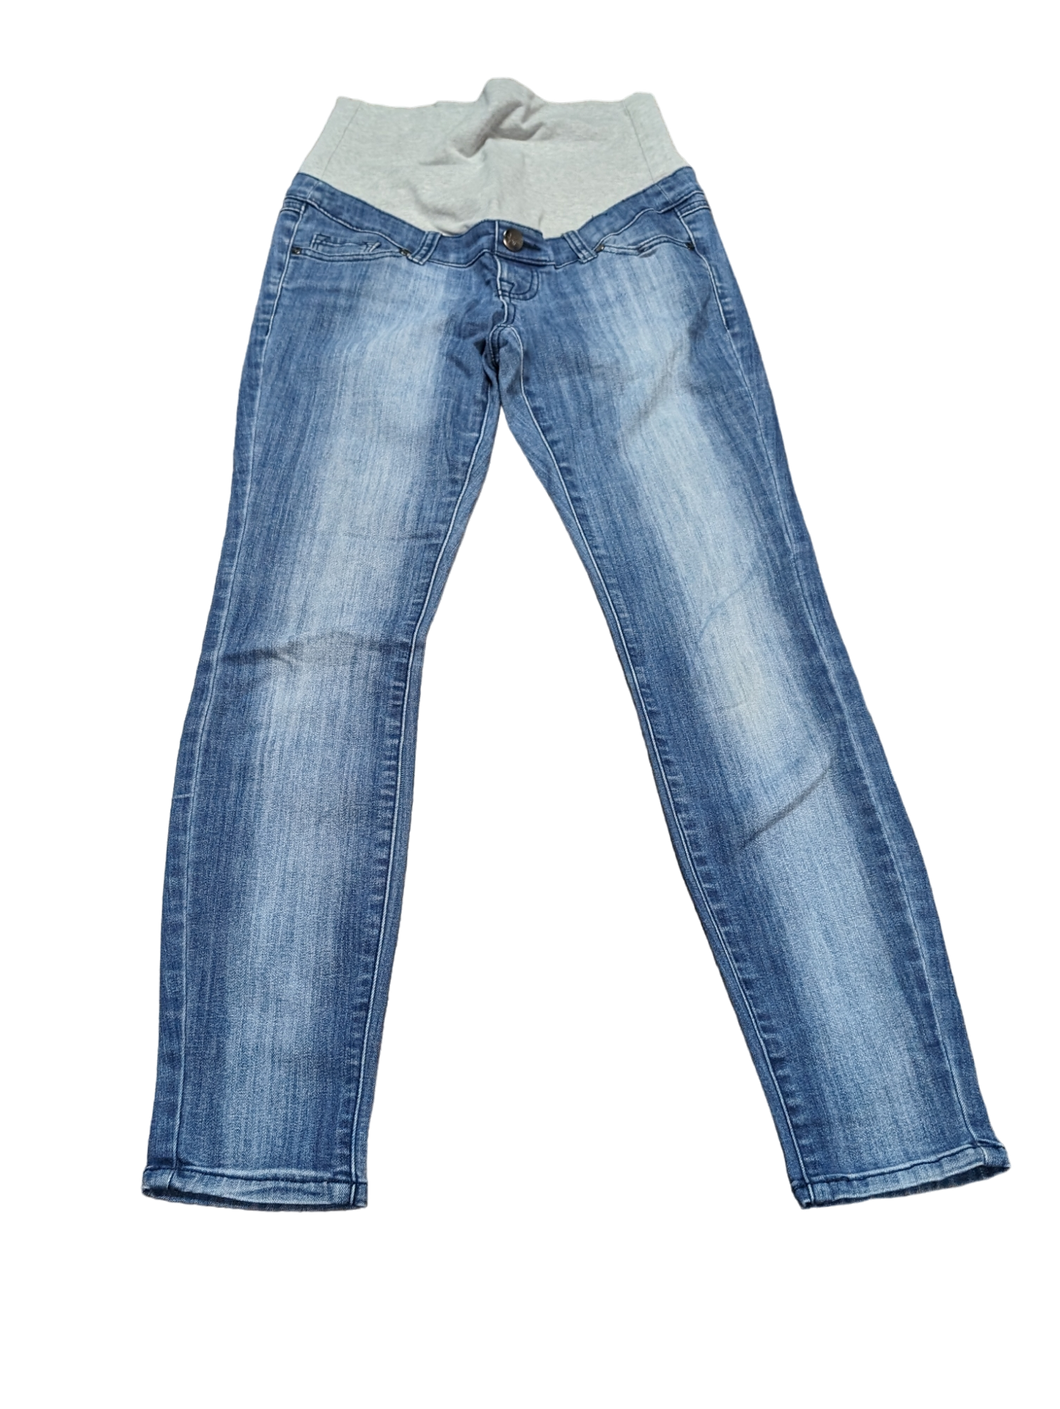 Jeans maternité xsmall Thyme